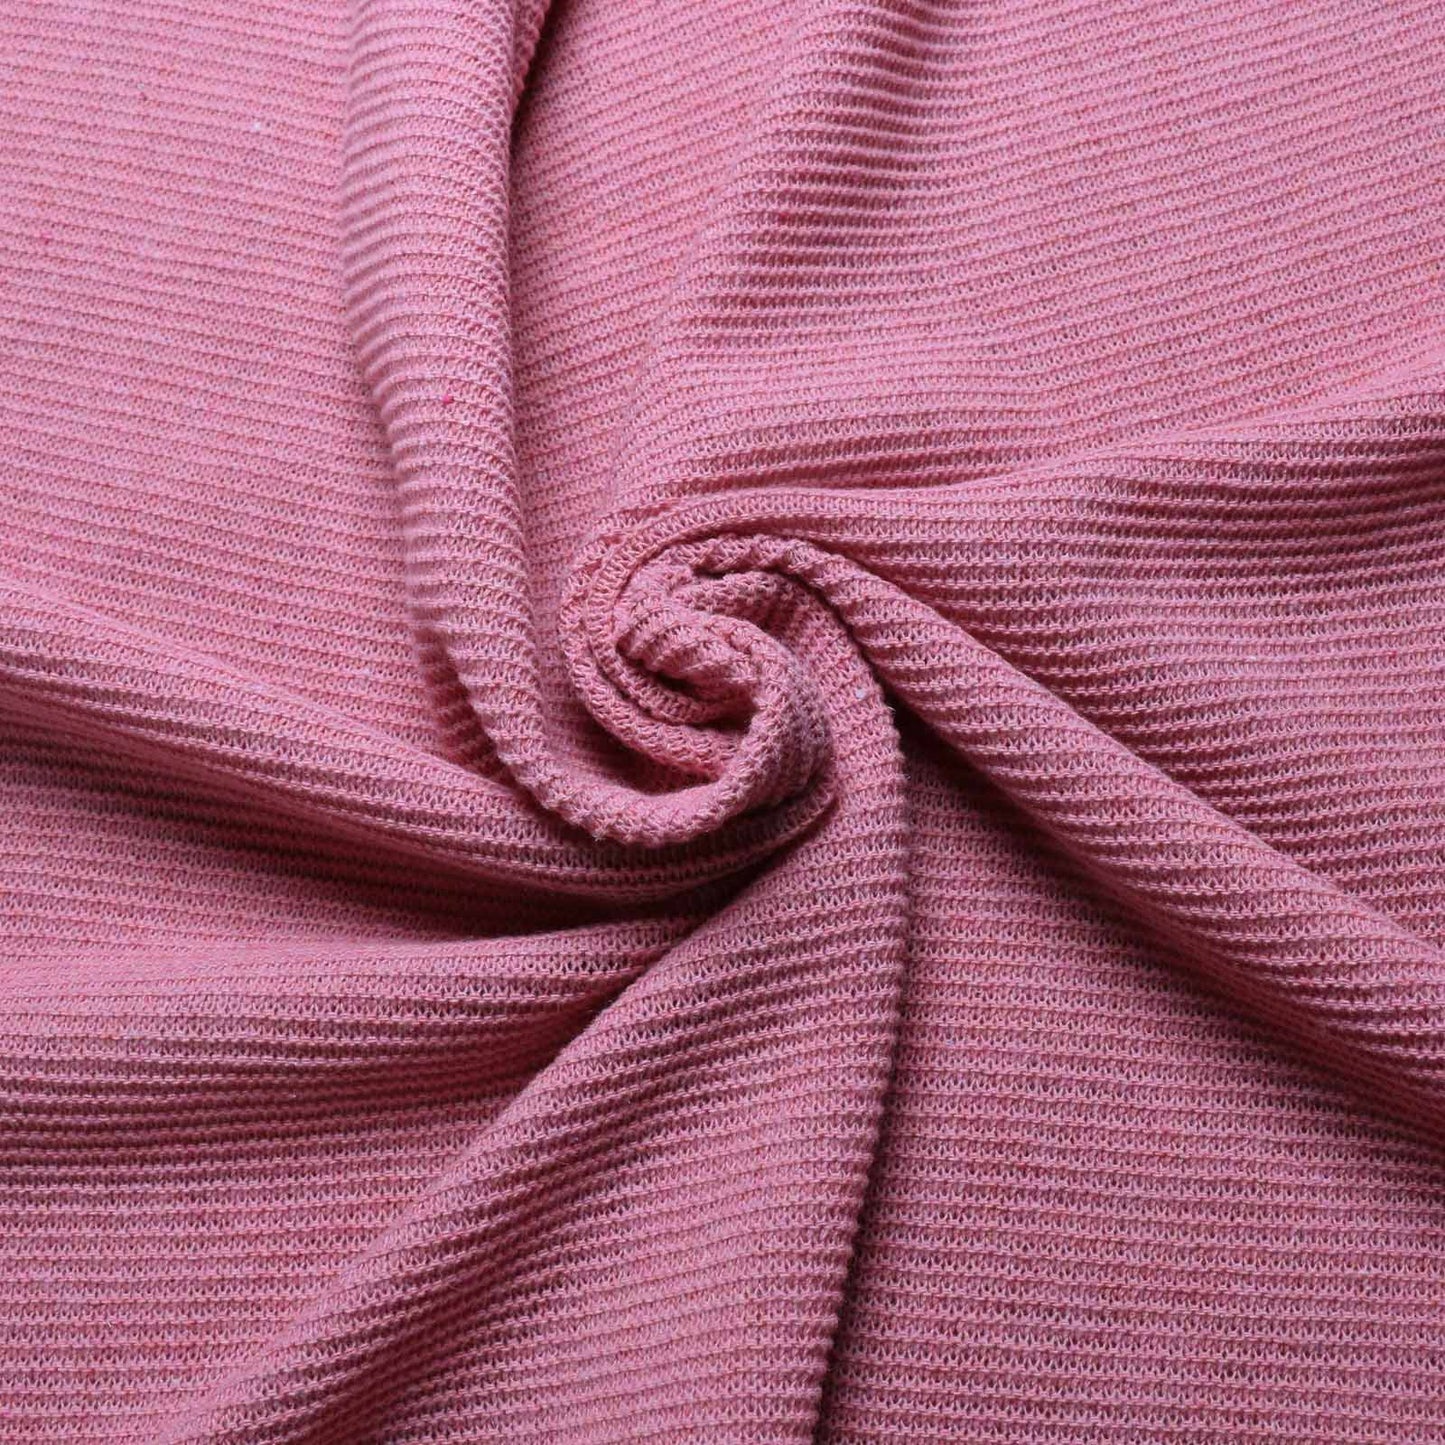 jersey purl knit wool fabric plain dusty pink colour